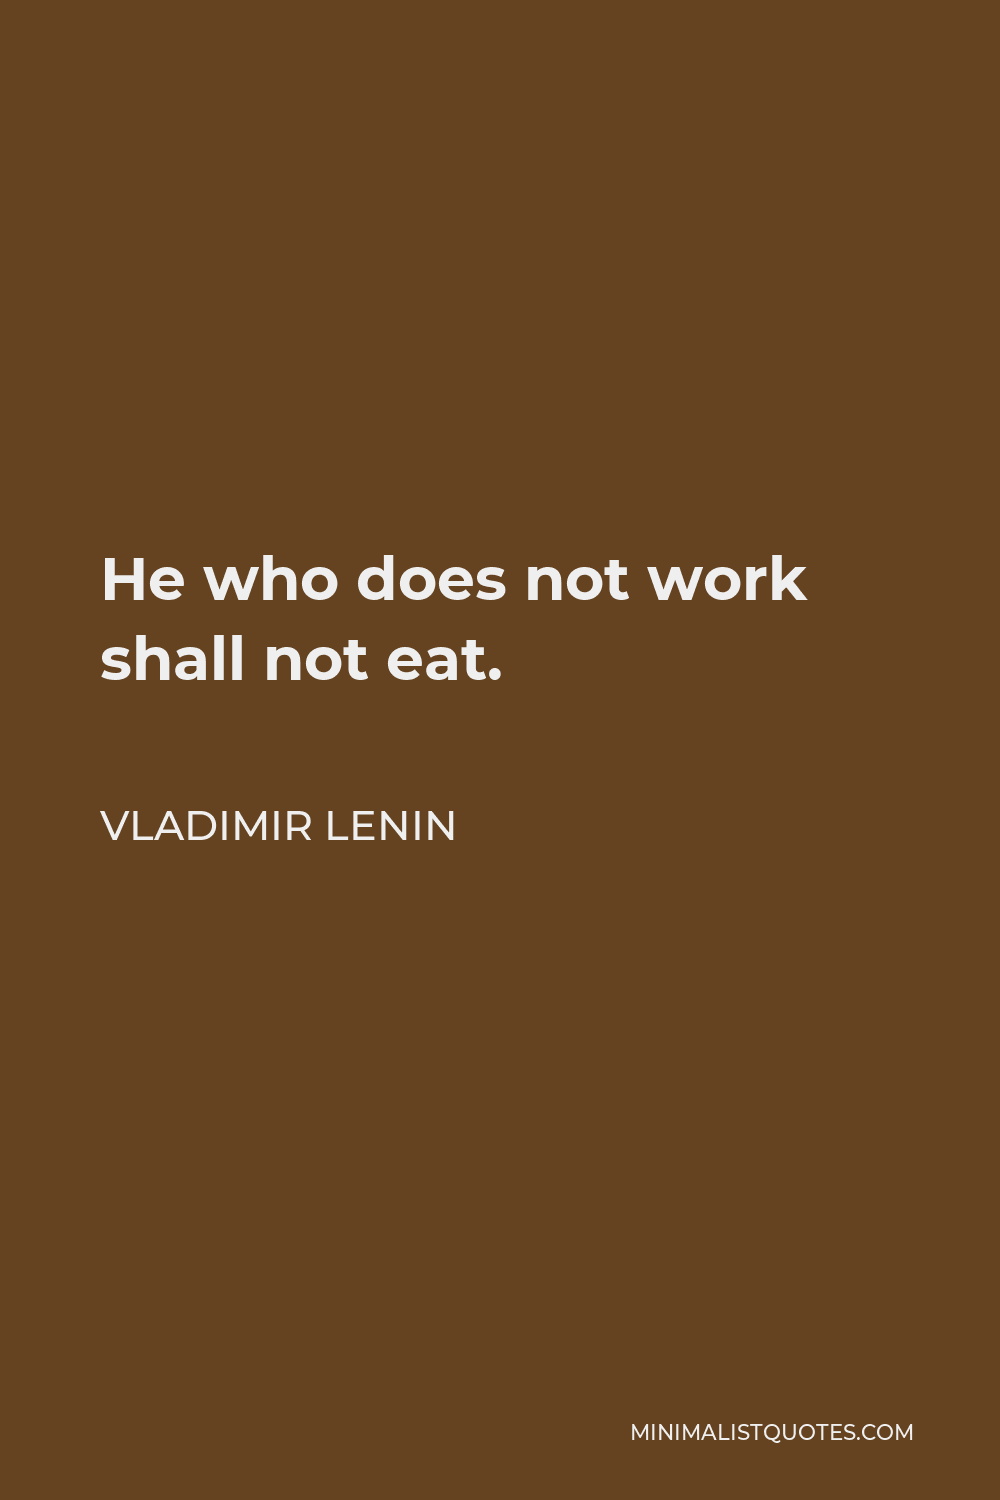 Vladimir Lenin Quote - He who does not work shall not eat.